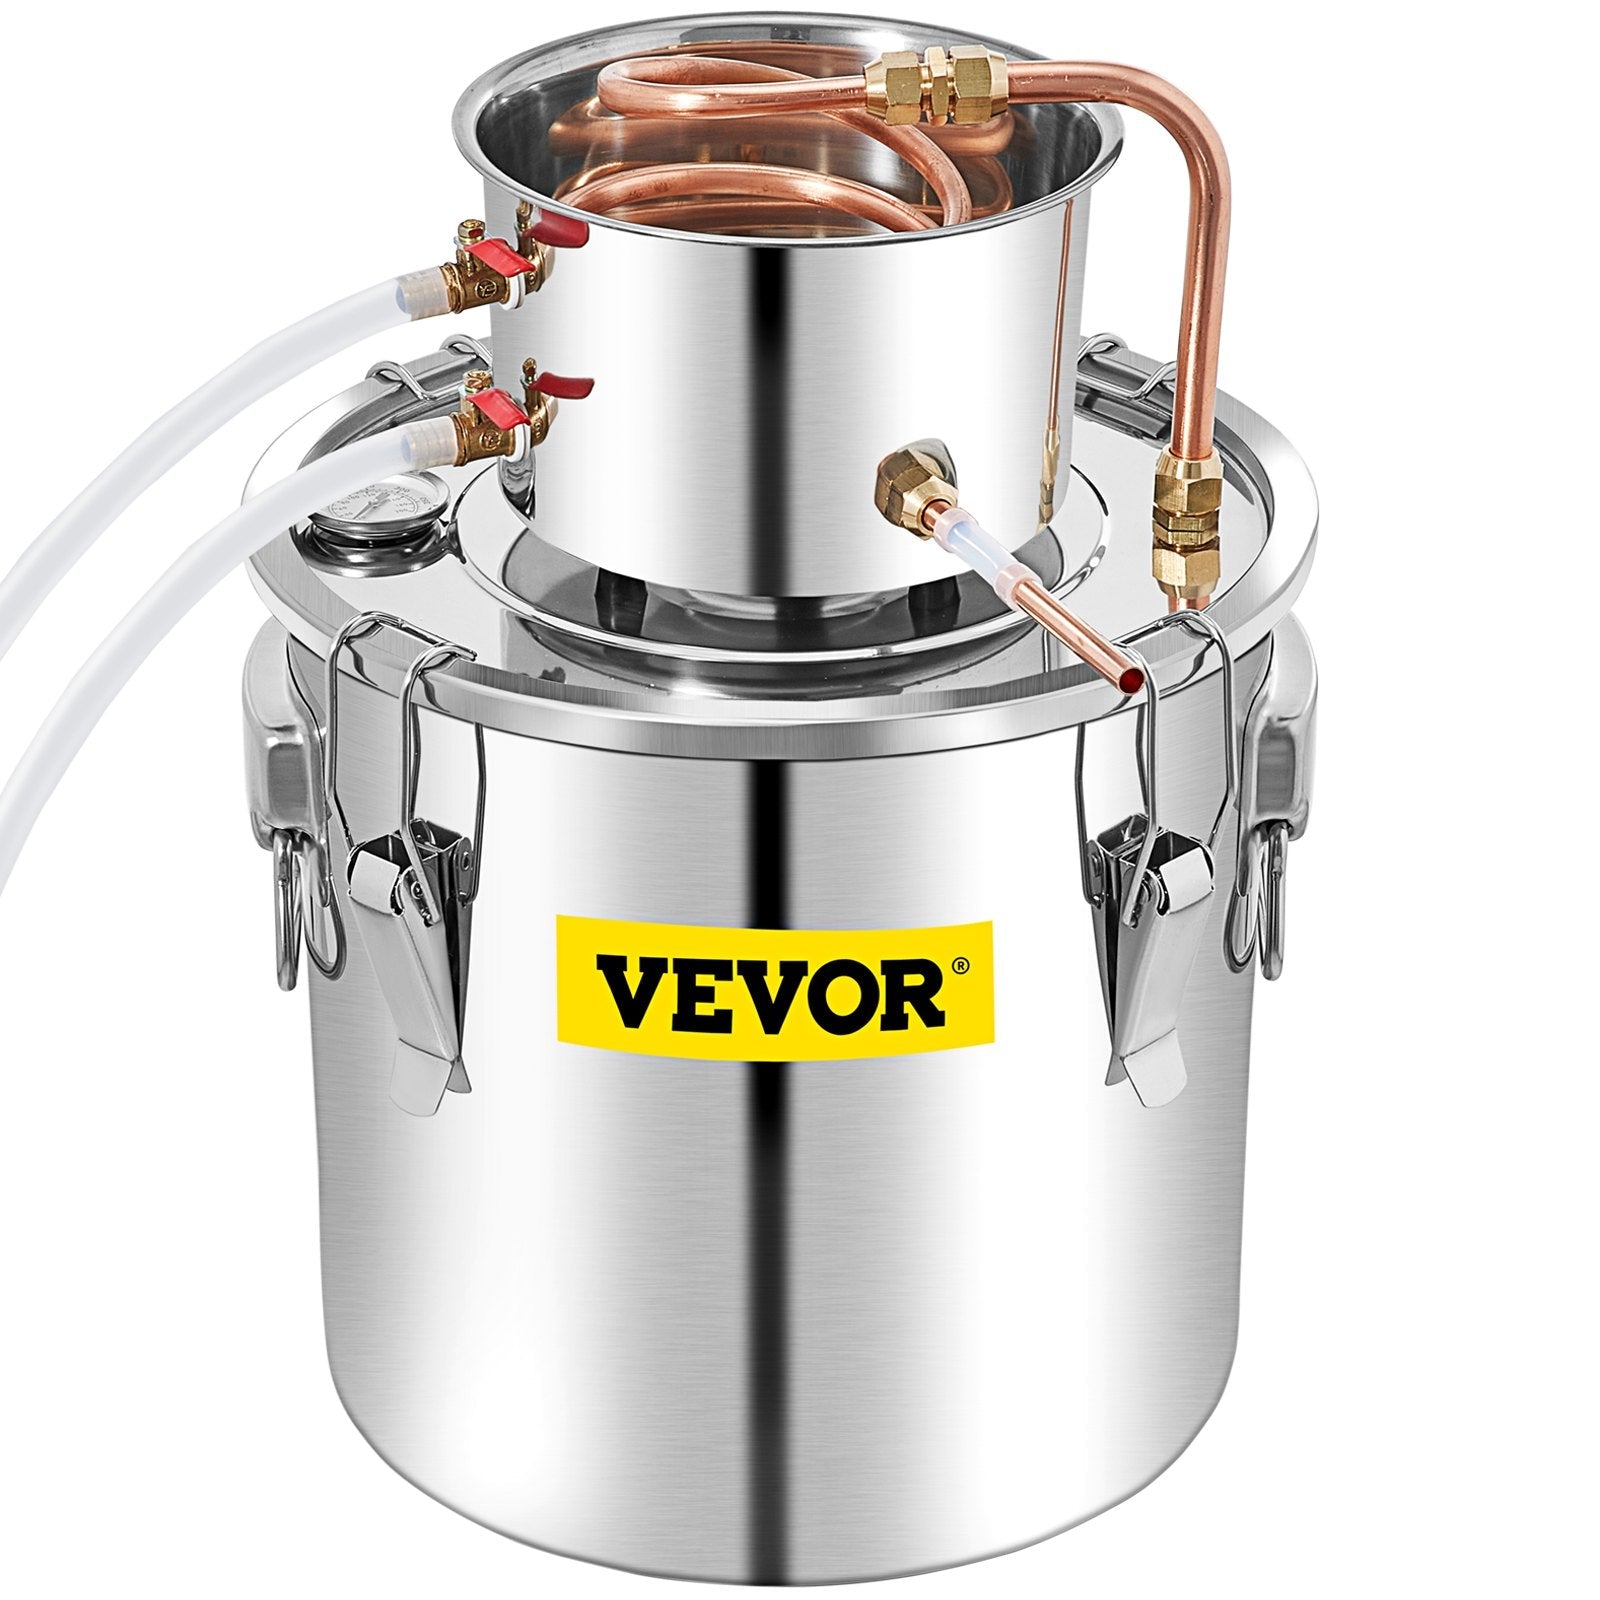 VEVOR Alcohol Still, 50L Distillery Kit w/Condenser & Pump, 13.2Gal Alcohol Still w/Copper Tube, Whiskey Distilling Kit w/Build-in Thermometer, Whiskey Making Kit for DIY Alcohol, Stainless Steel-9